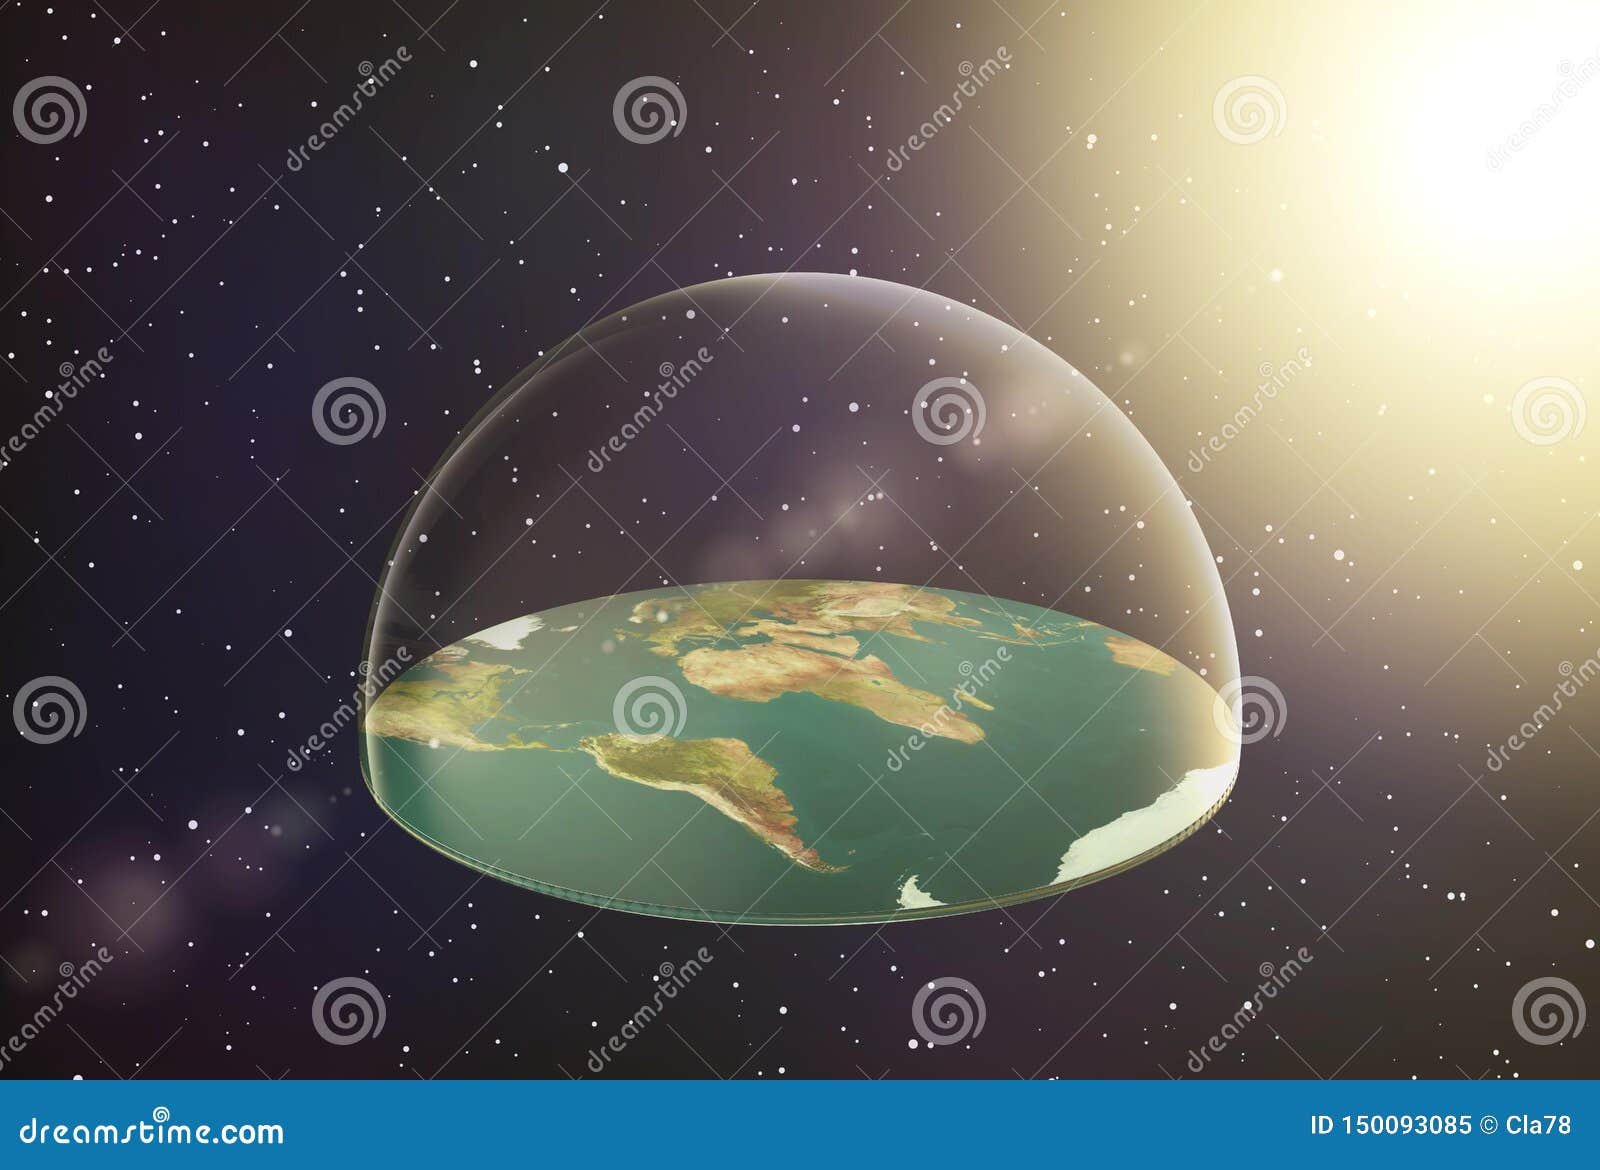 Flat earth in space stock illustration. Illustration of